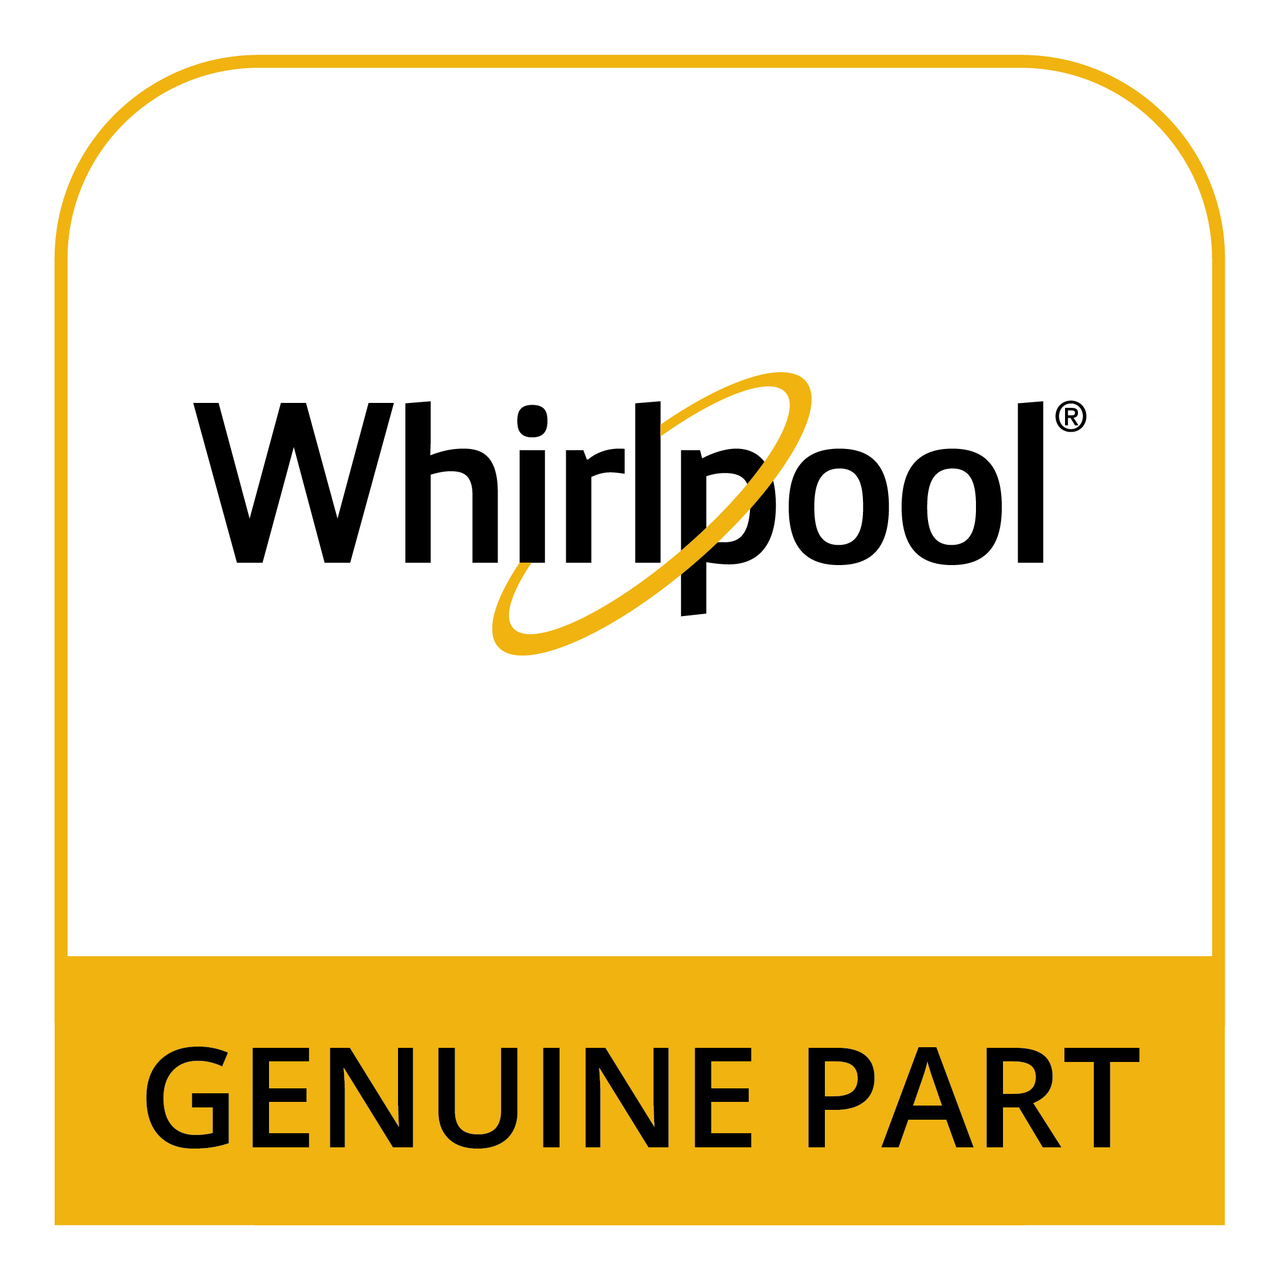 Whirlpool 71002205 - Support- E - Genuine Part